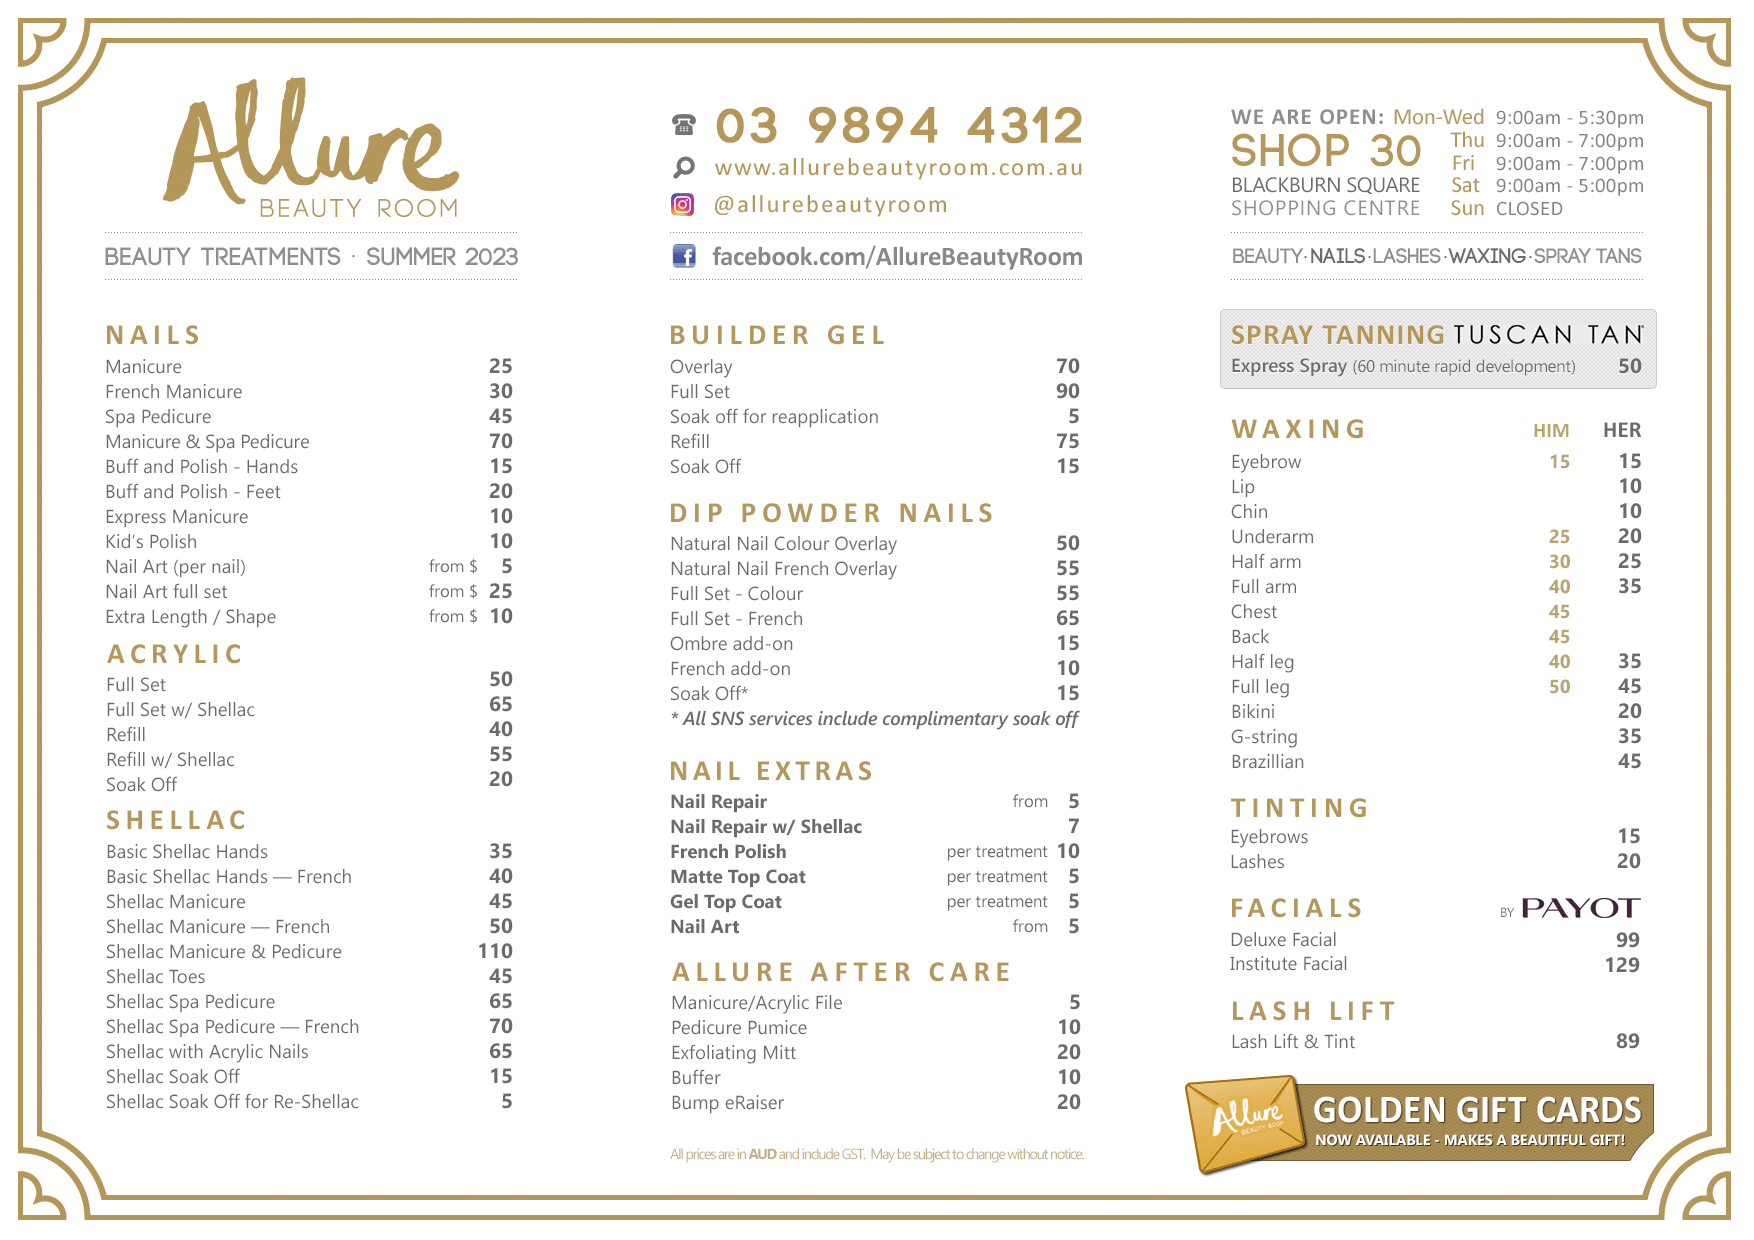 Price List and Beauty Treatments